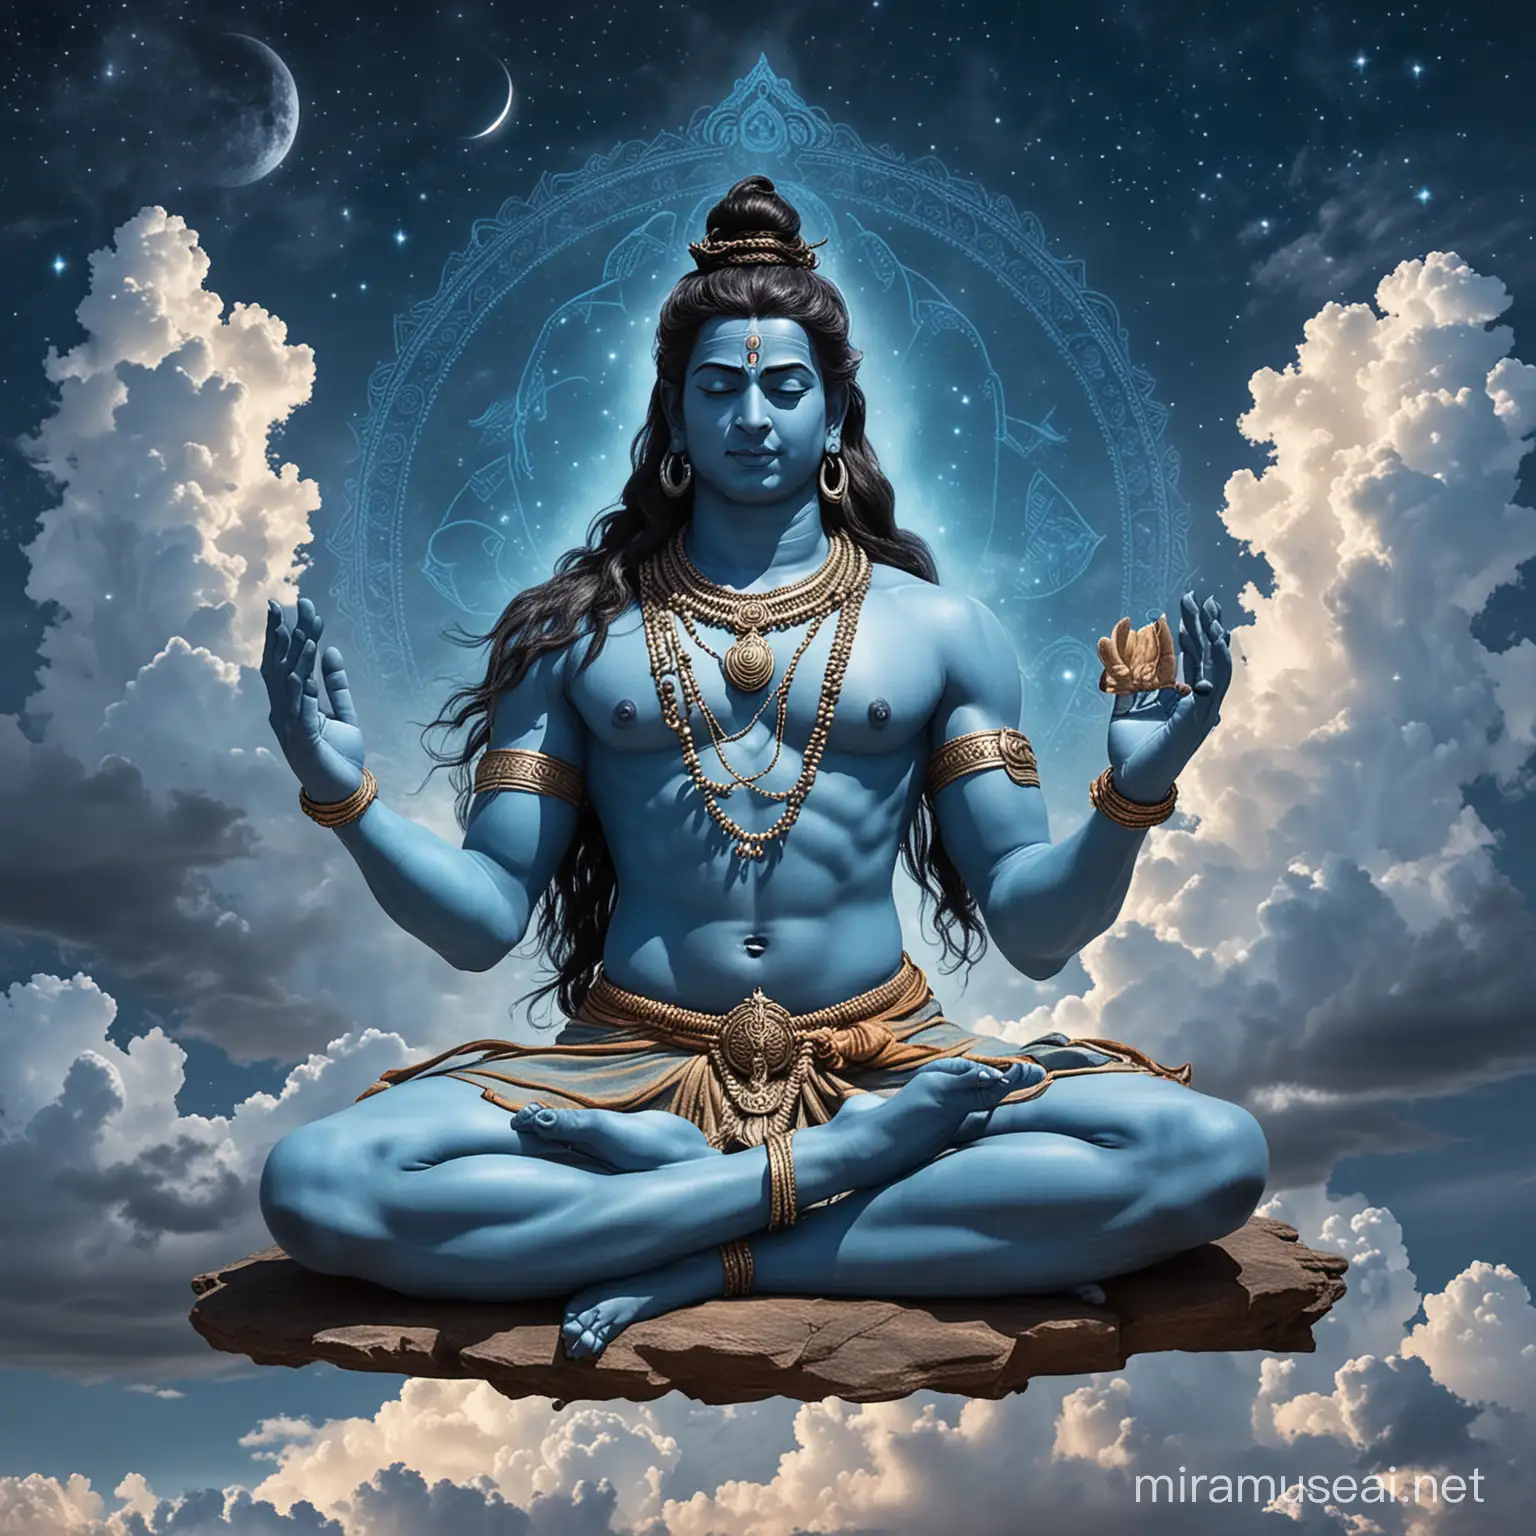 Create an image depicting Shiva, the Hindu deity, seated atop the vast expanse of the sky. Show Shiva in a serene meditative posture, with his legs crossed and hands in a mudra of contemplation. His divine form should be adorned with celestial ornaments and symbols, including a crescent moon in his matted hair, a garland of serpents around his neck, and the third eye on his forehead. Surround Shiva with wisps of clouds and celestial beings paying homage, with the sky transitioning from shades of blue to hints of cosmic darkness. Capture the sense of divine tranquility and cosmic presence emanating from Shiva as he gazes benevolently upon the universe.